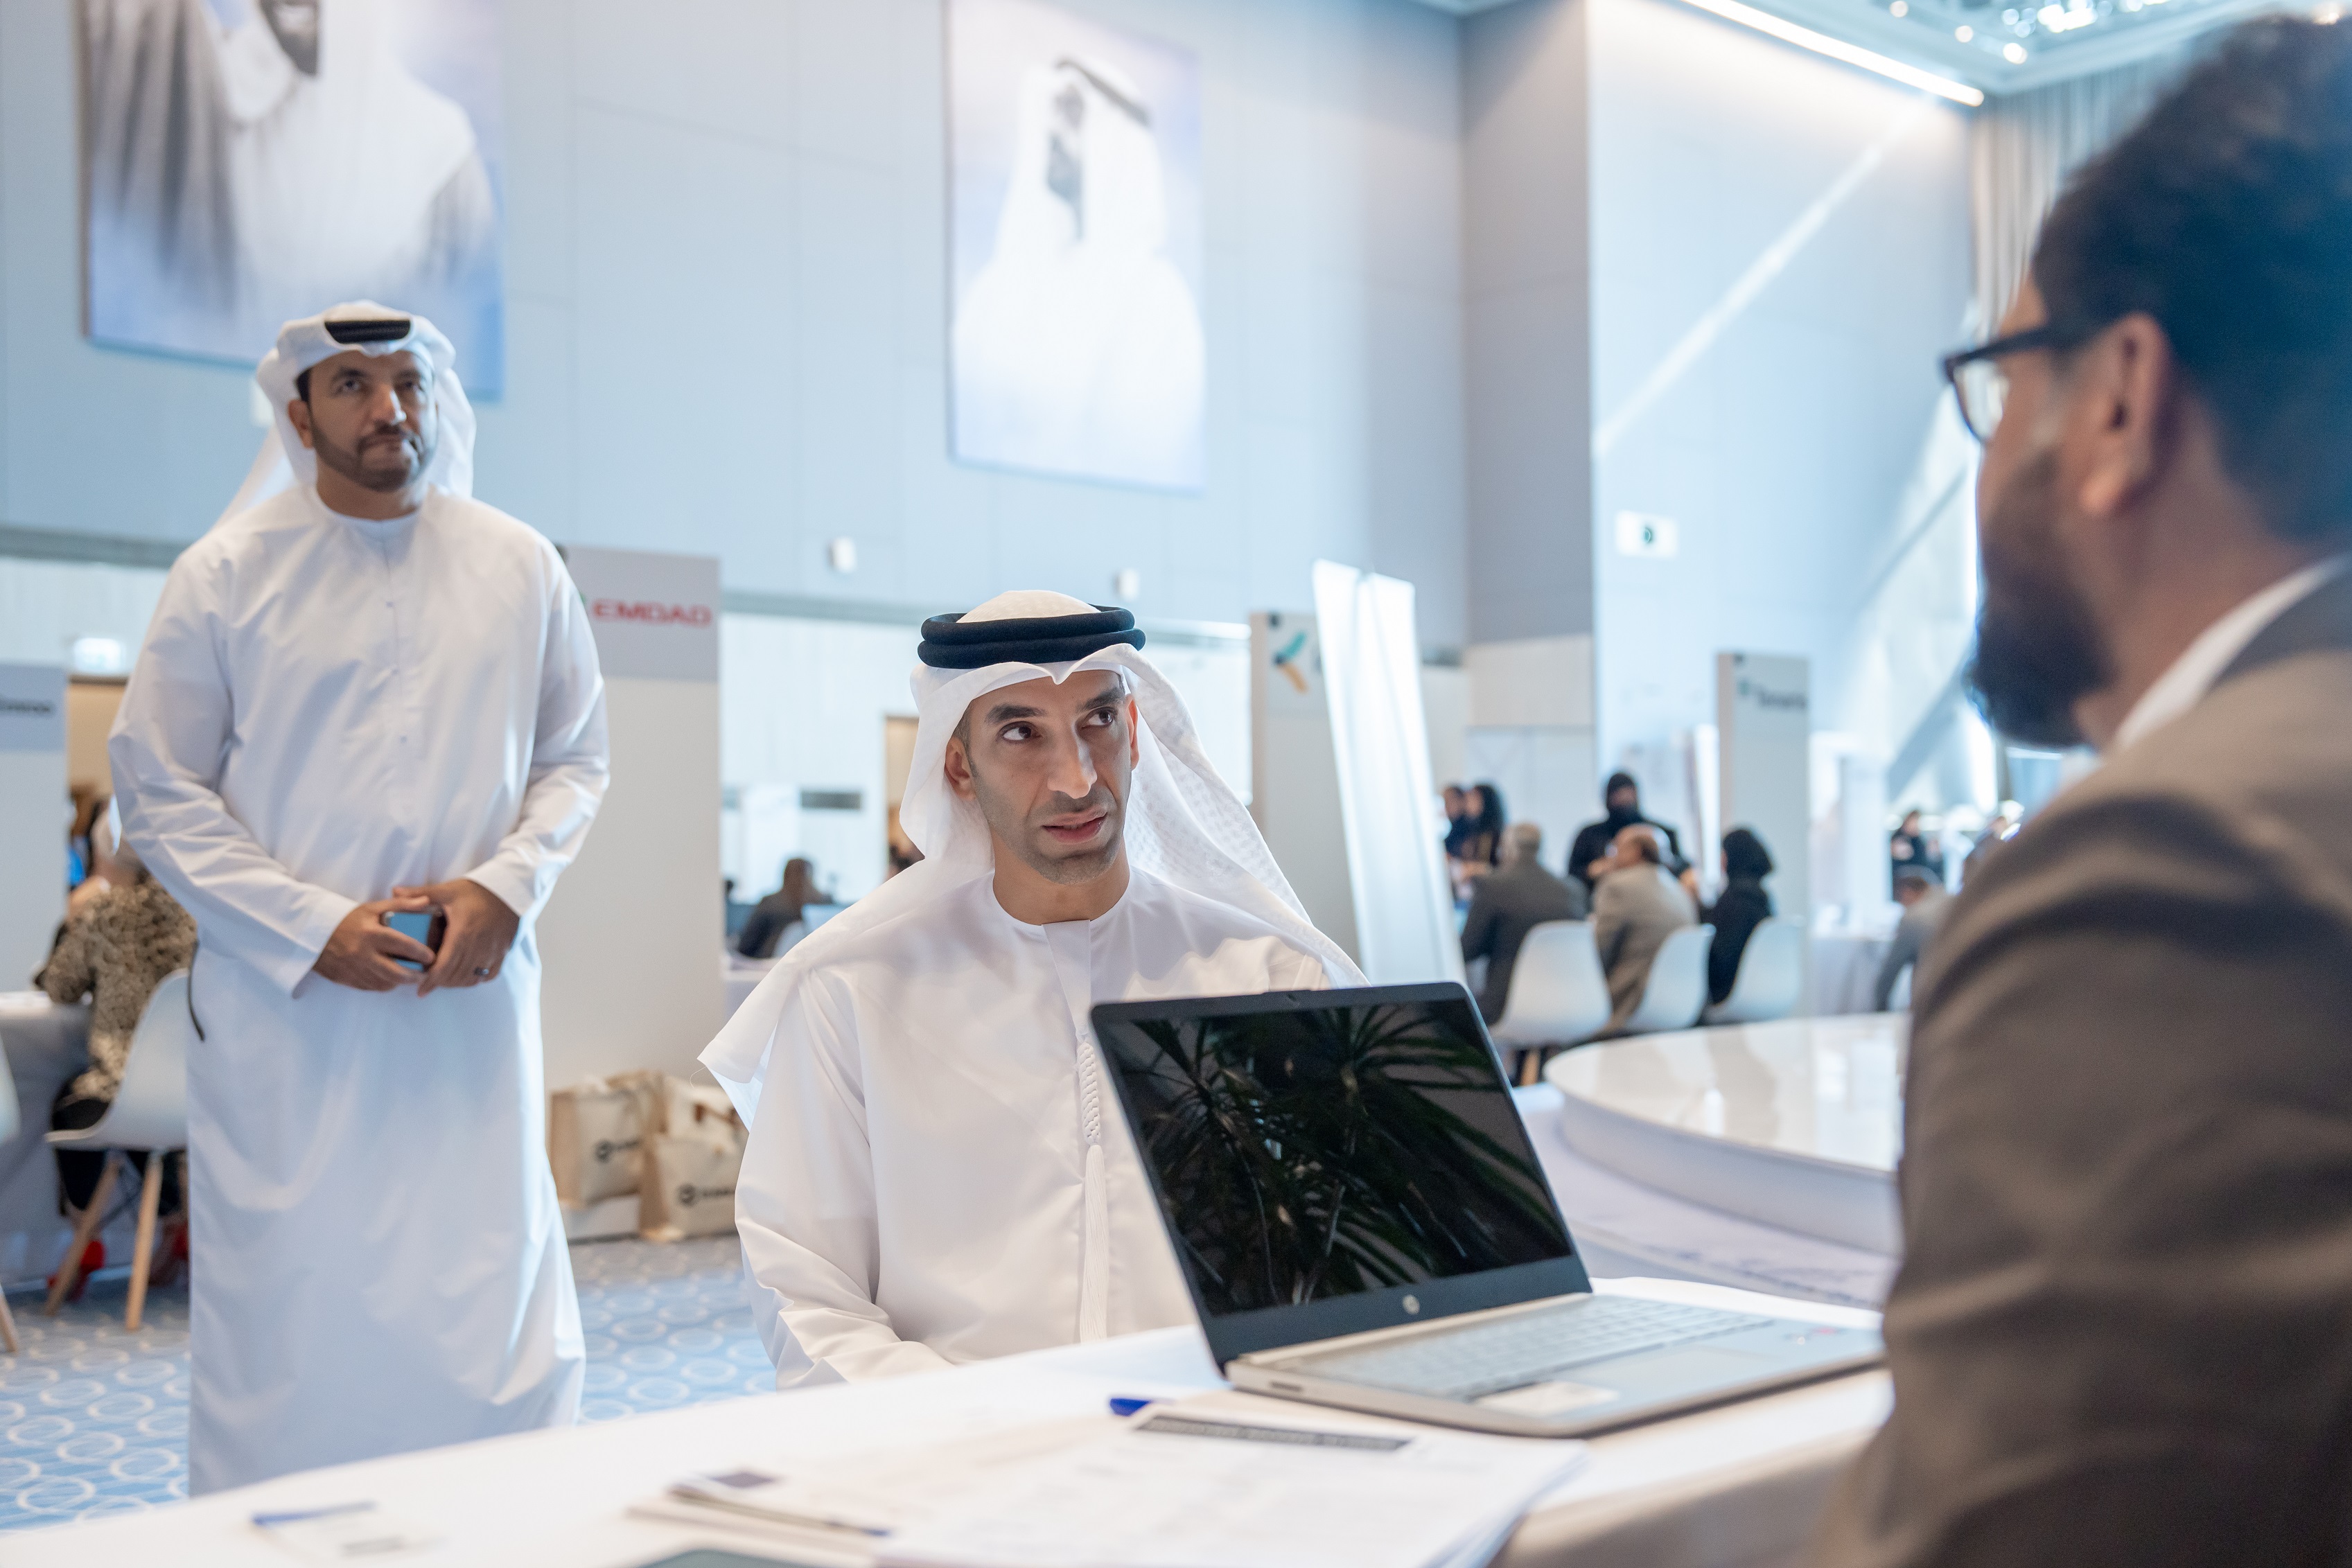 3-day Industrialist Career Fair for Emirati talent launches in Abu Dhabi 